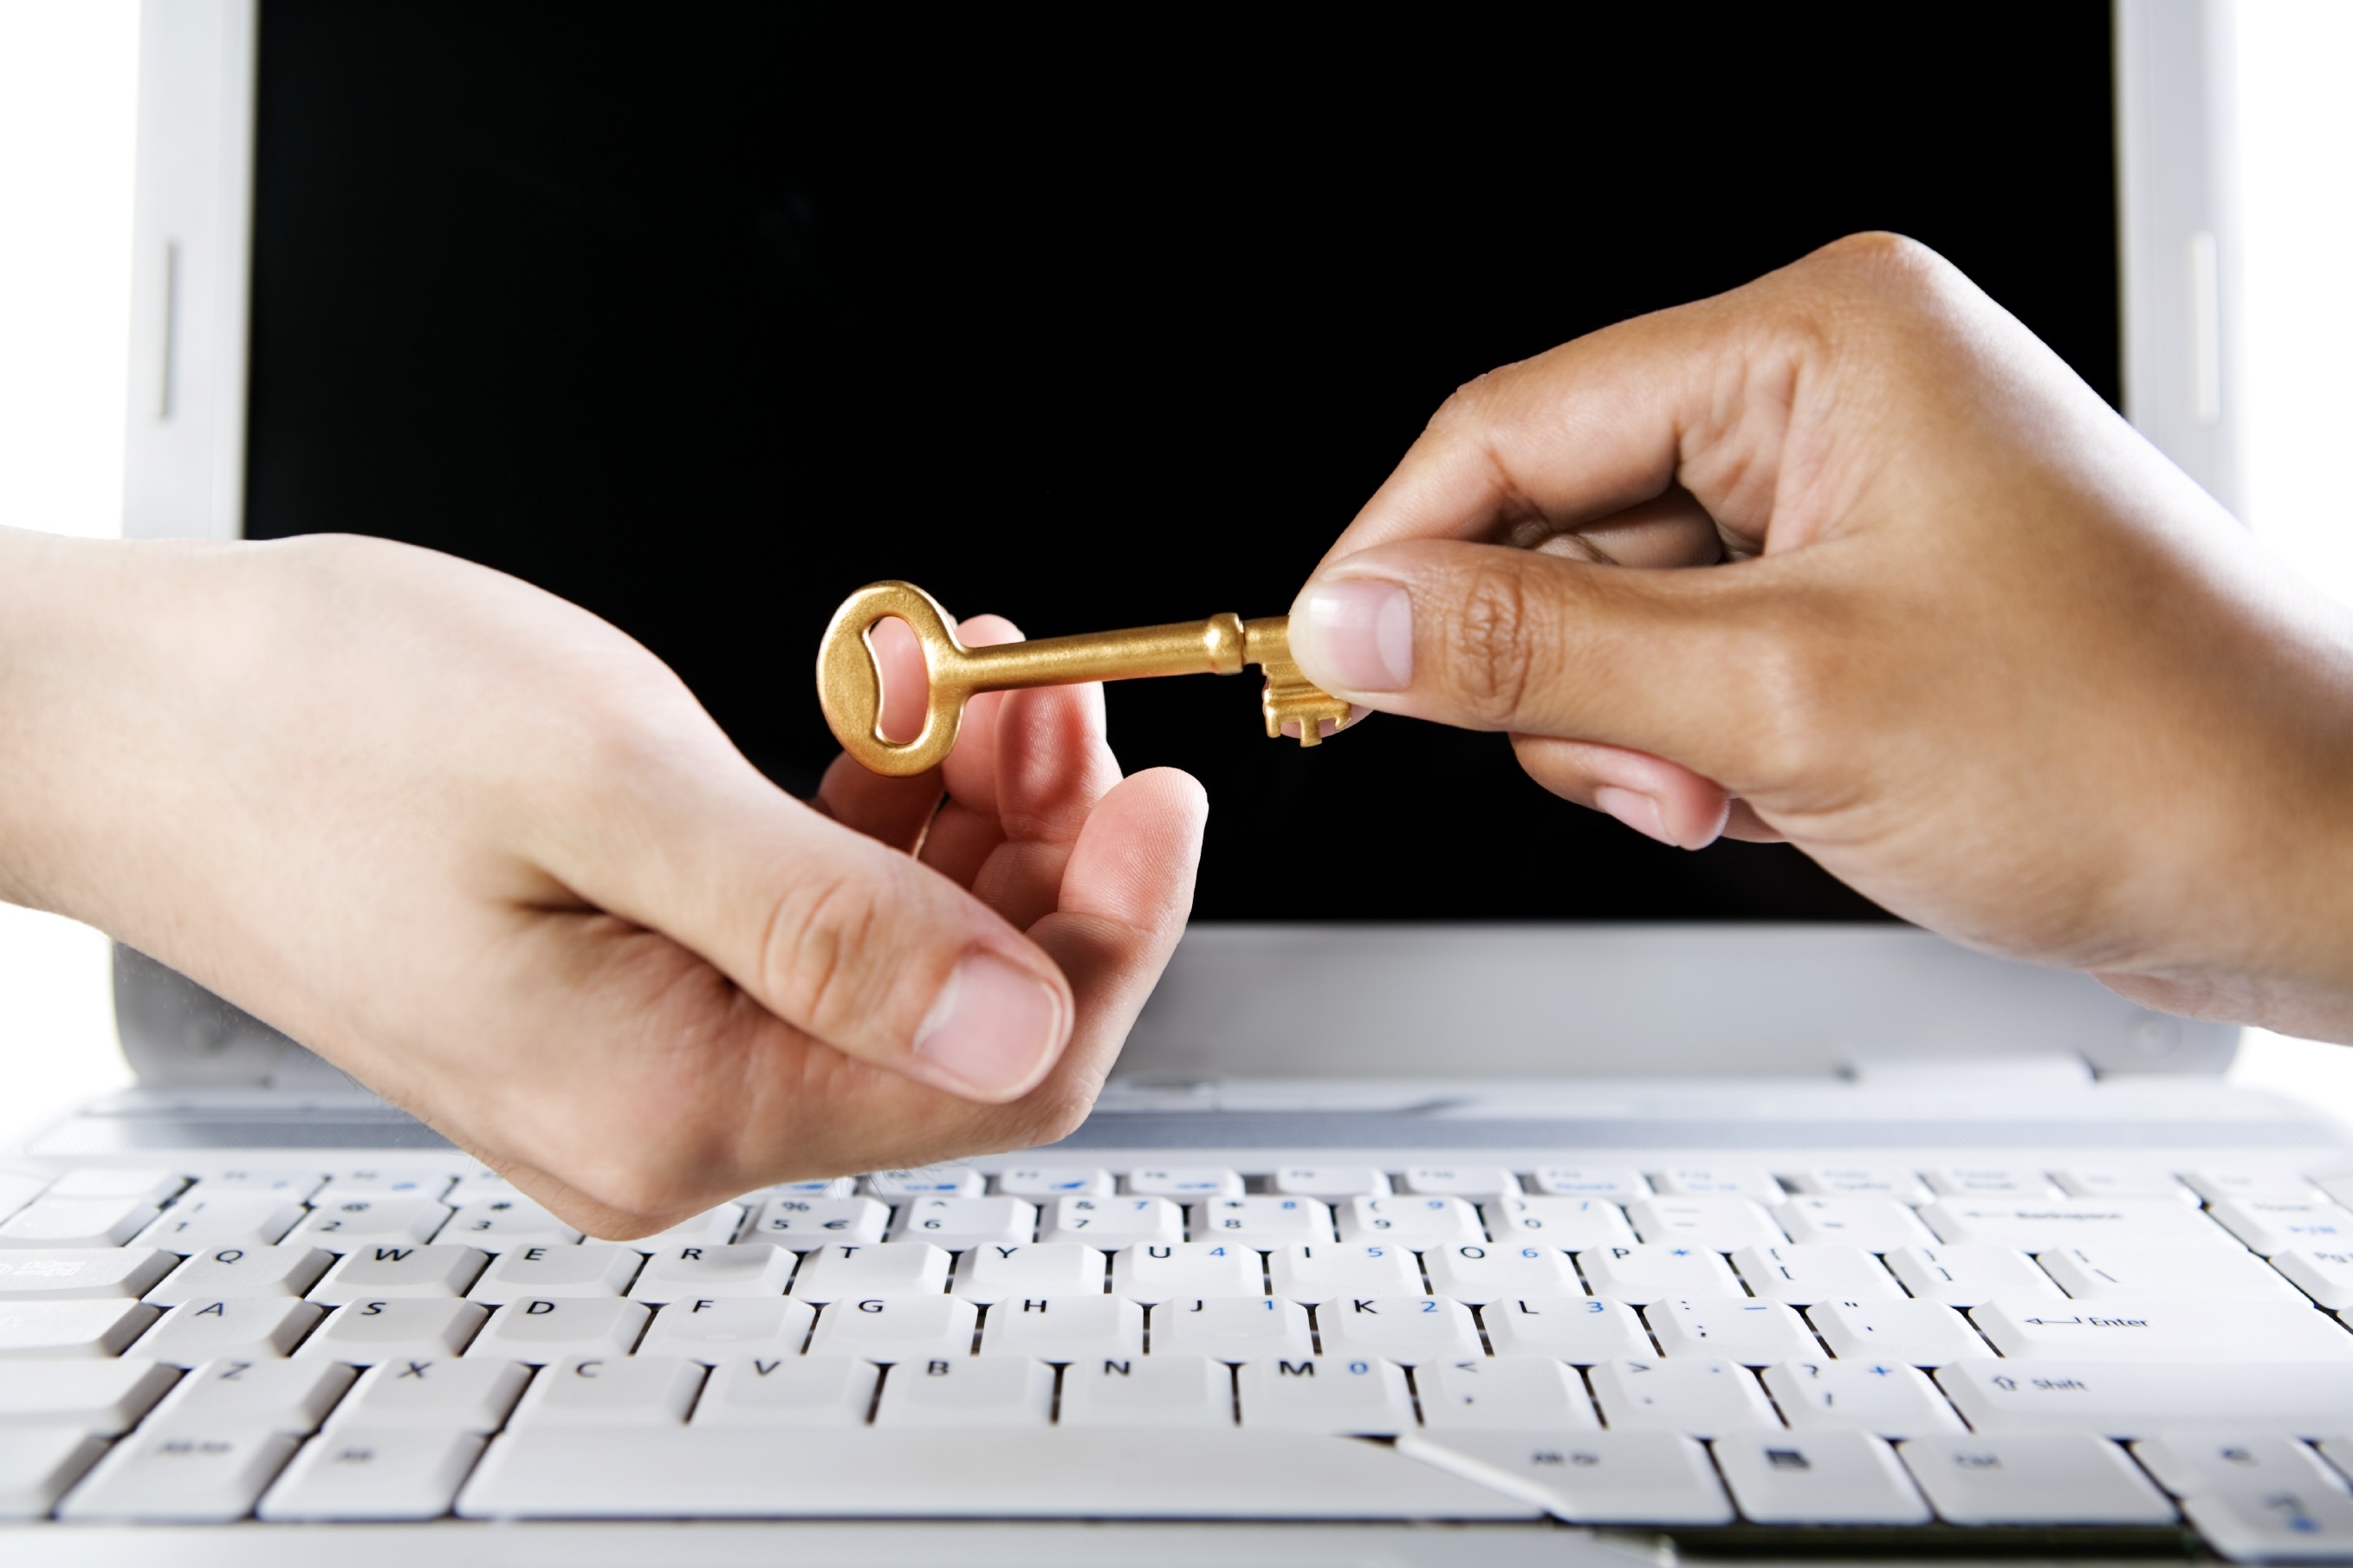 Handing over the golden key, both hands are over the laptop.